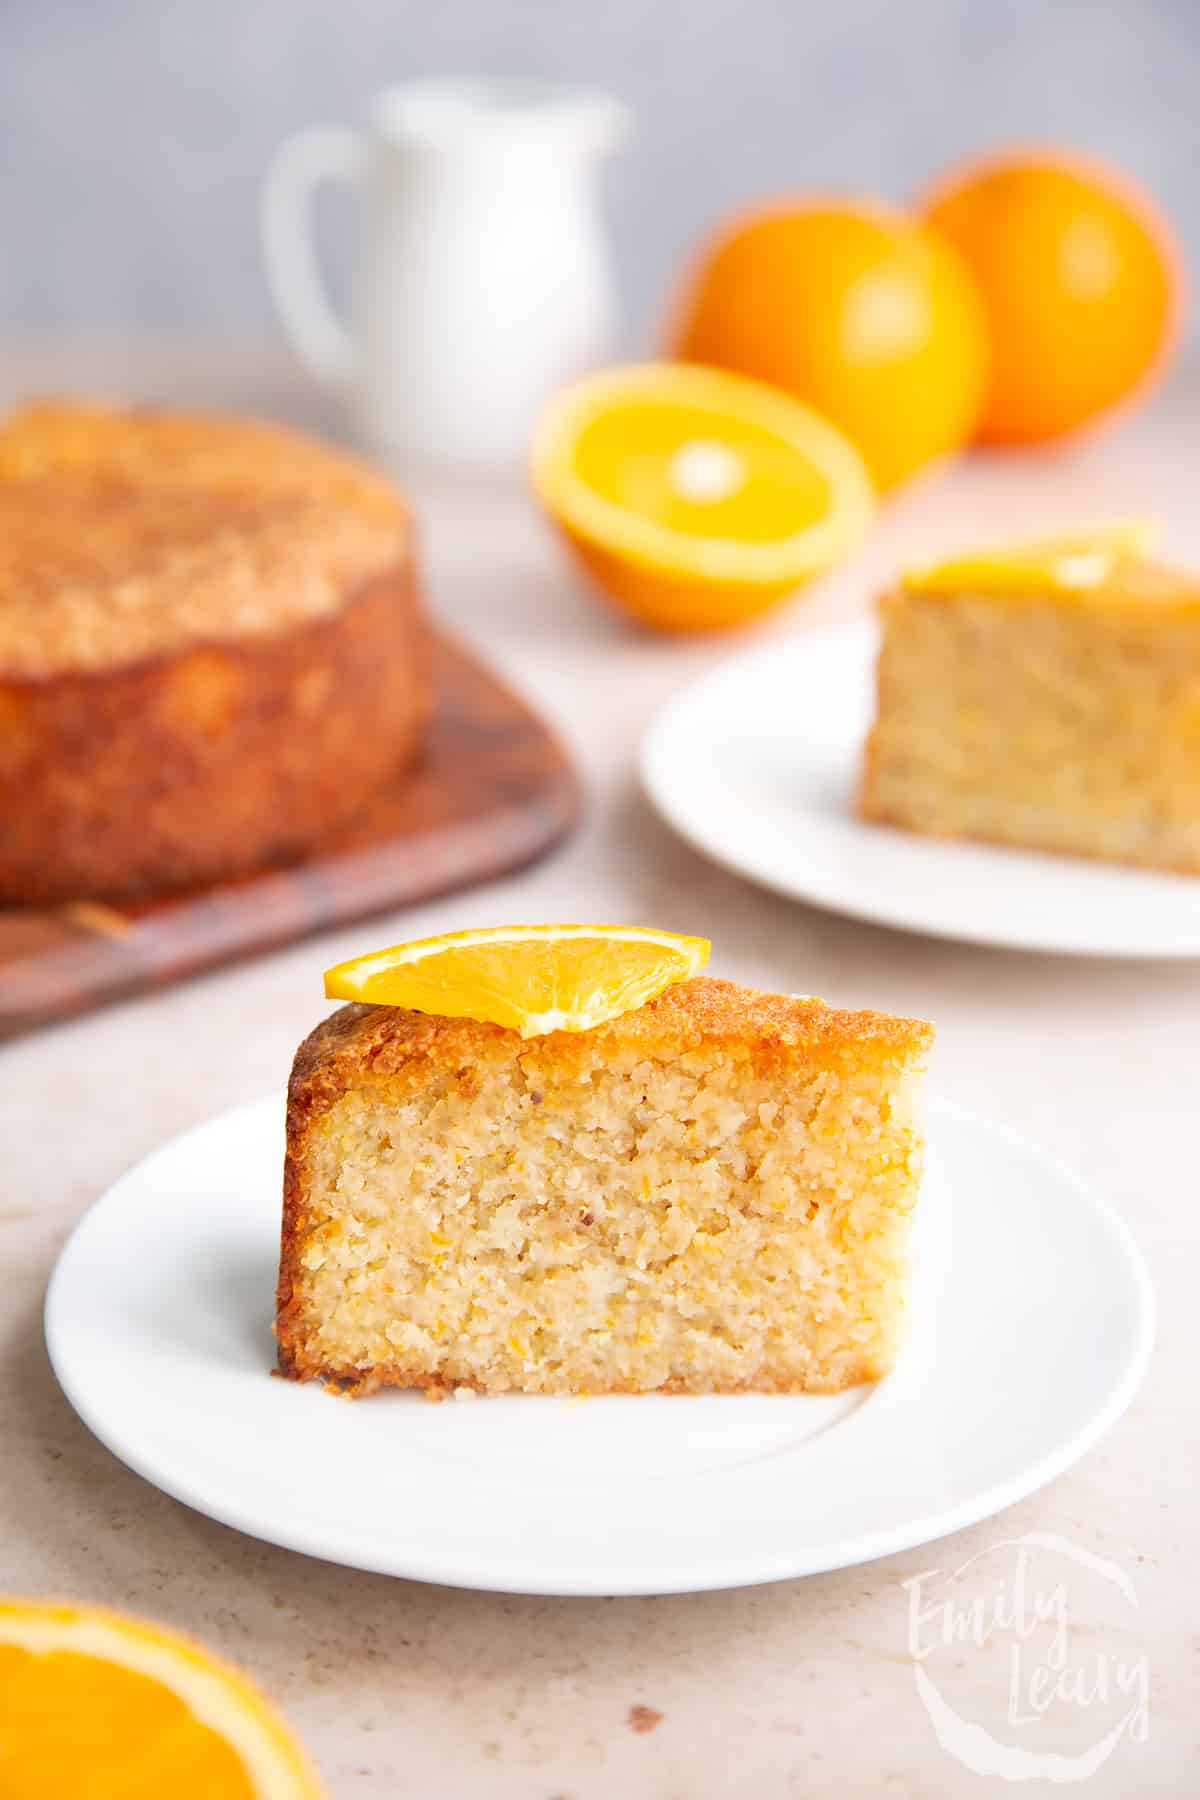 Fisihed slice of gluten free orange cake topped with a small slice of orange. 